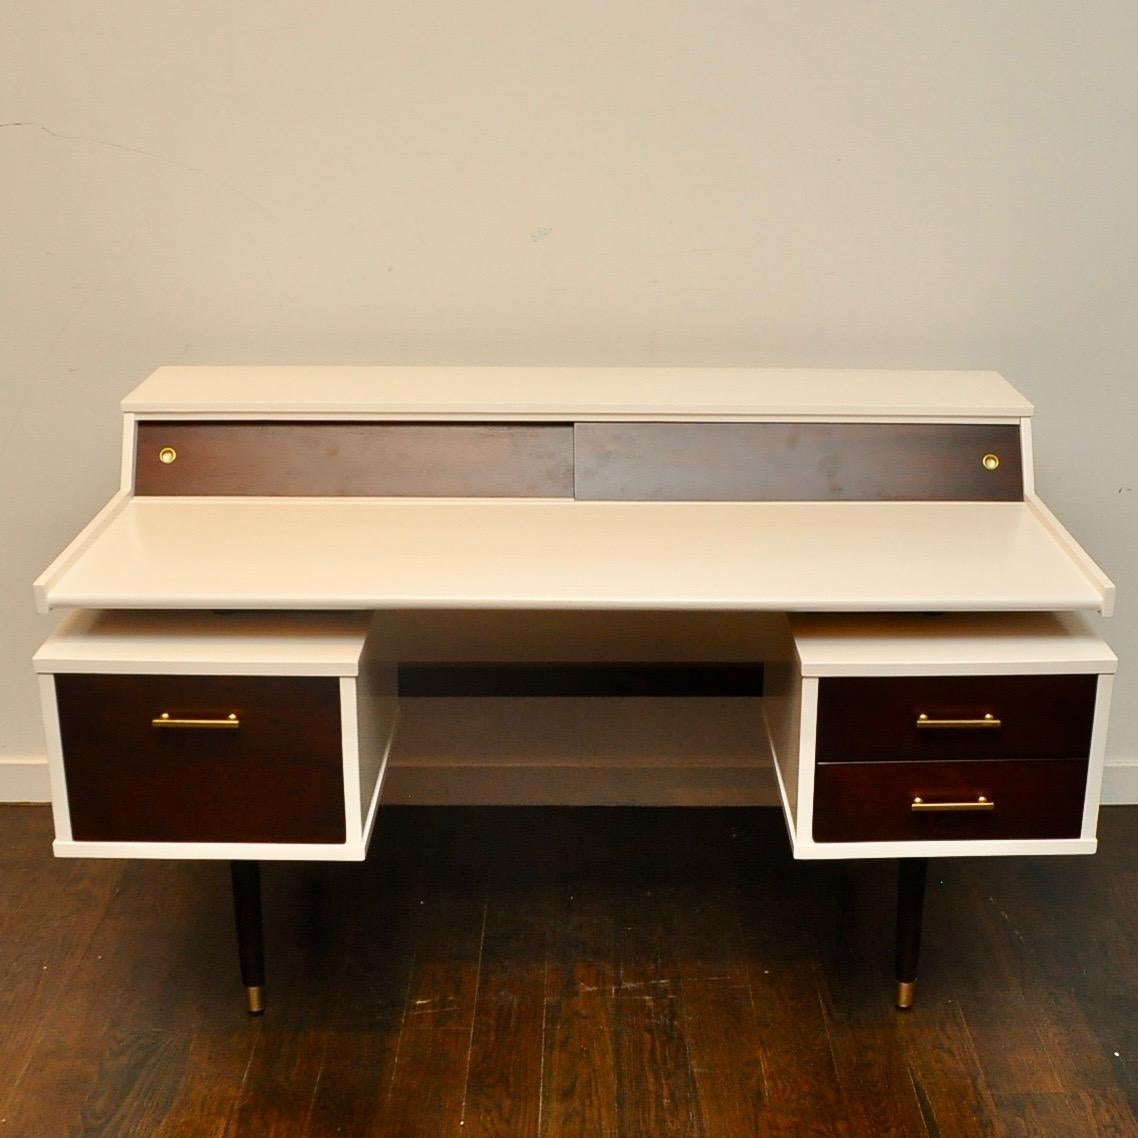 1950s era floating desk by Drexel that has been tweaked in a two tone lacquer and walnut finish. Very close in design to the other floating desk Milo Baughman did for Drexel.